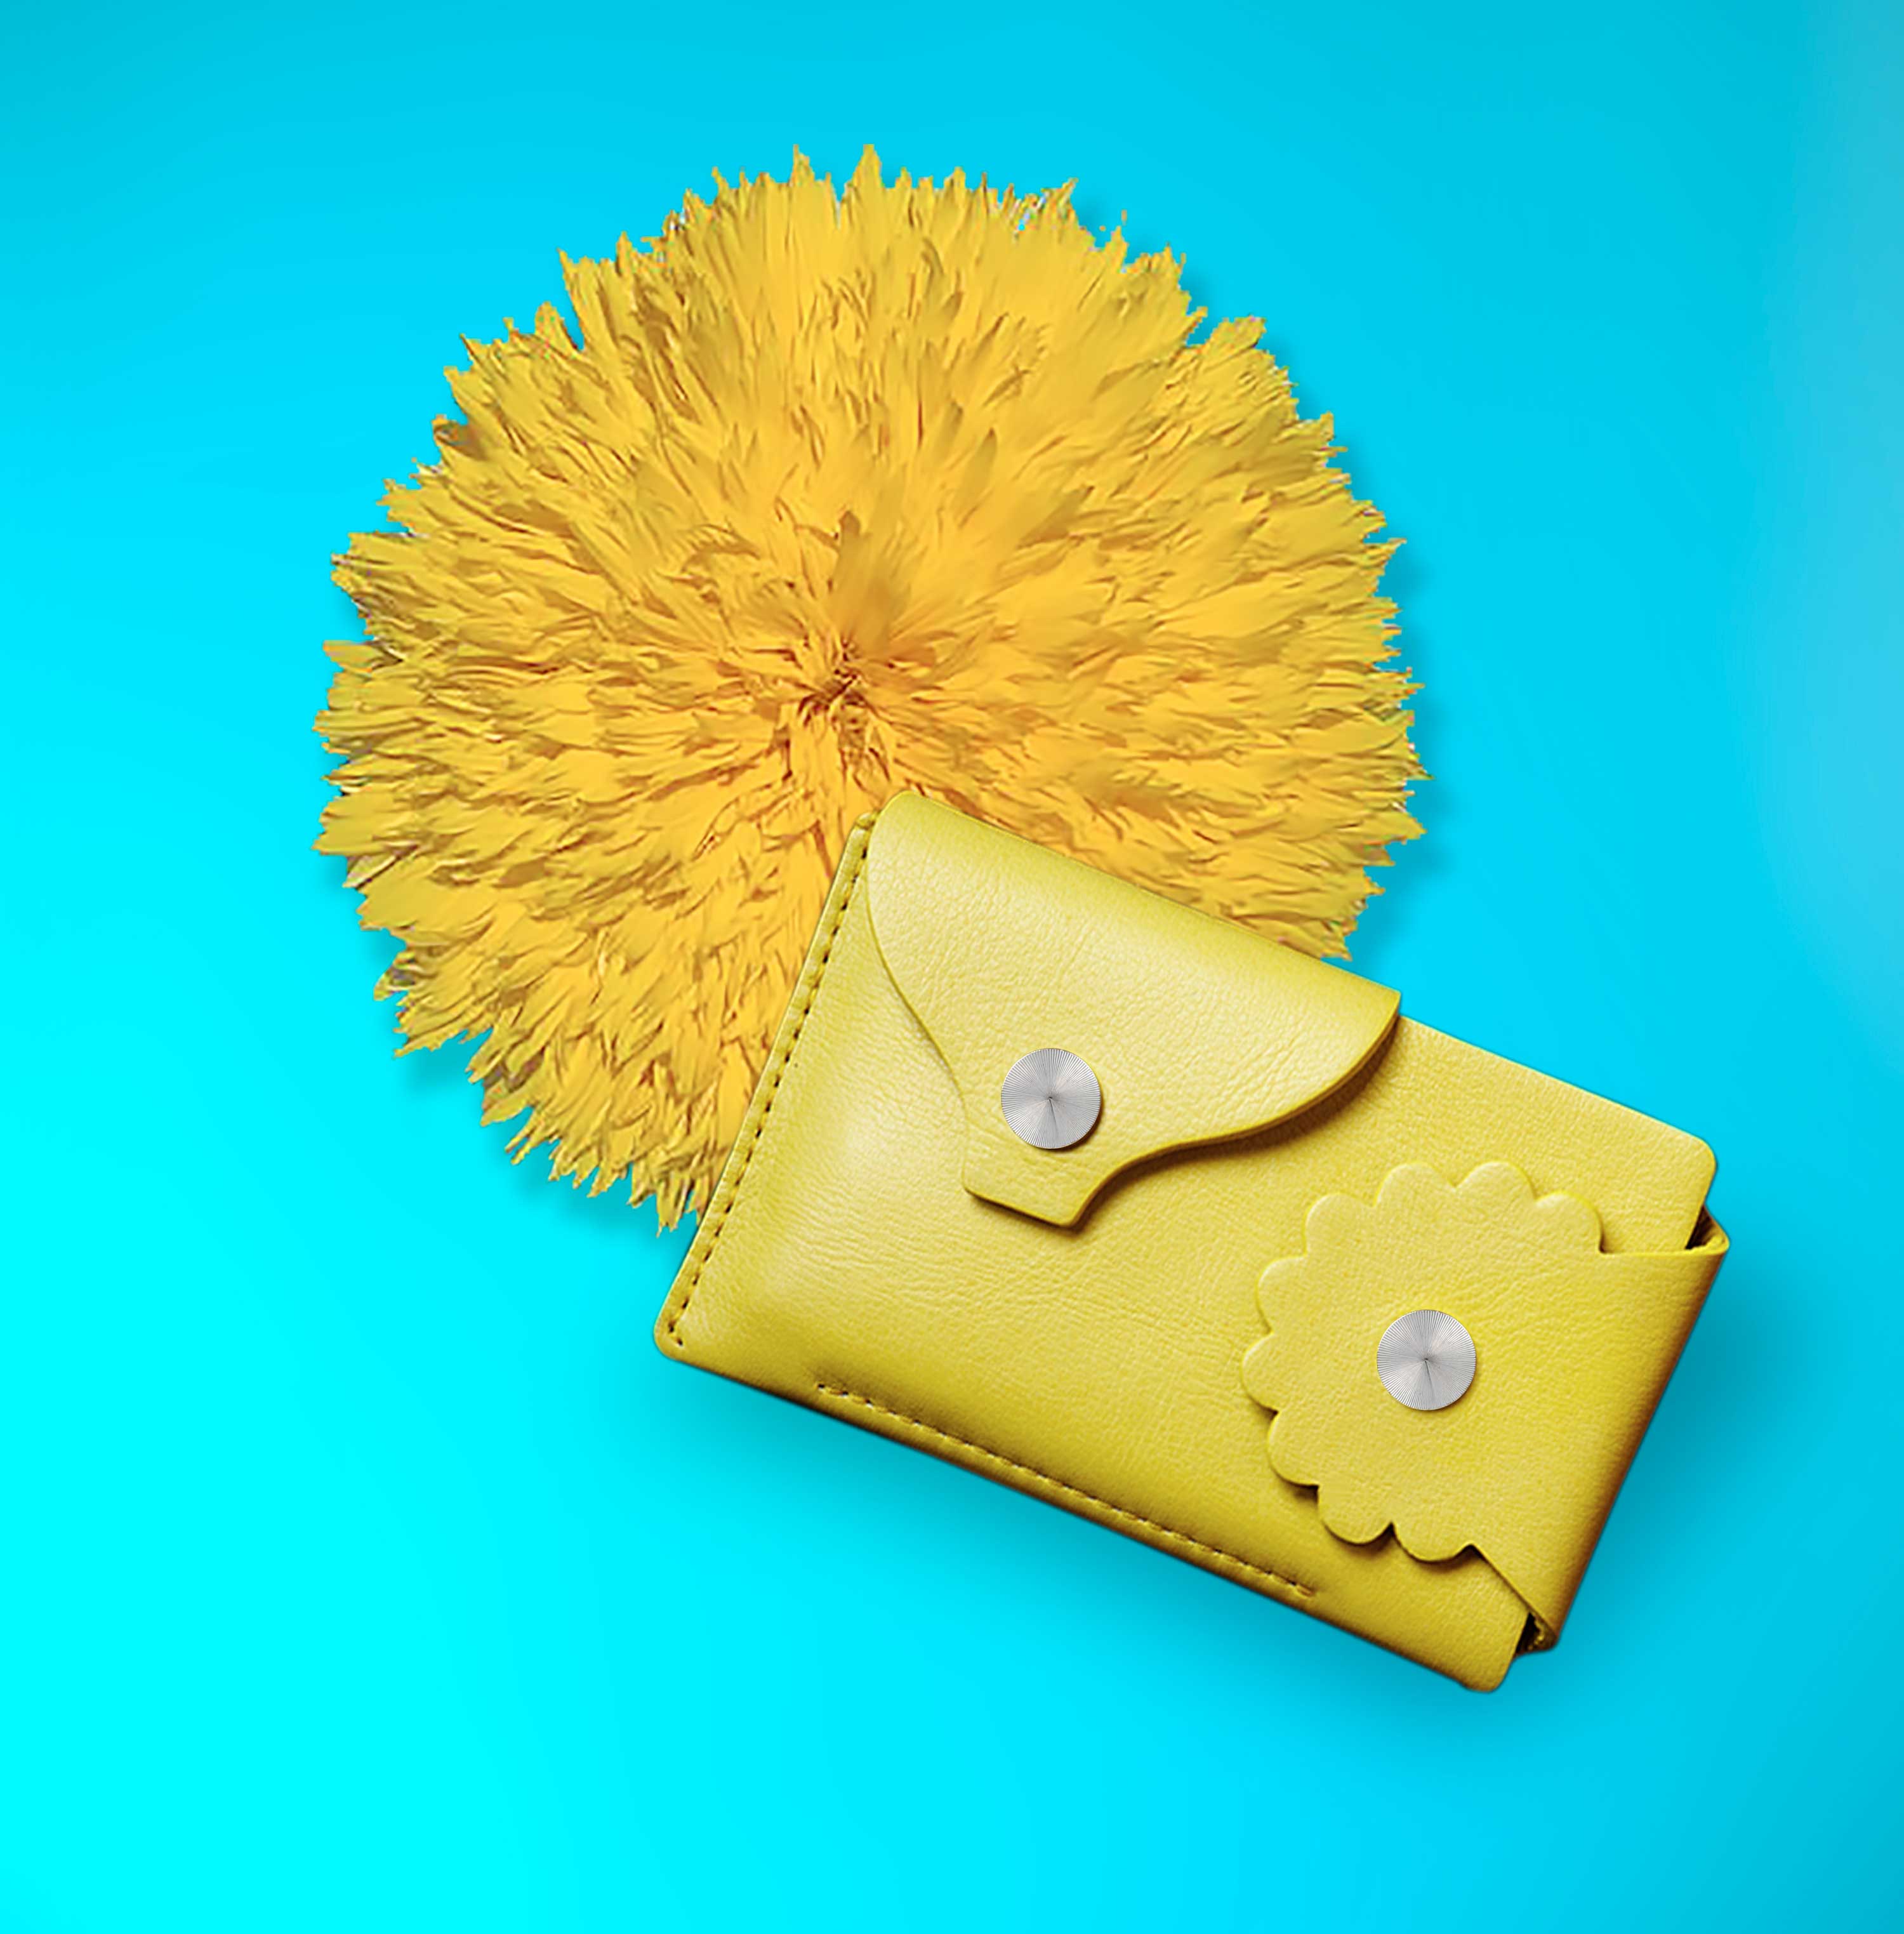 Marrs Makers Marigold Yellow Leather Wallet. Bright turquoise background color with large sunflower in this product shot.